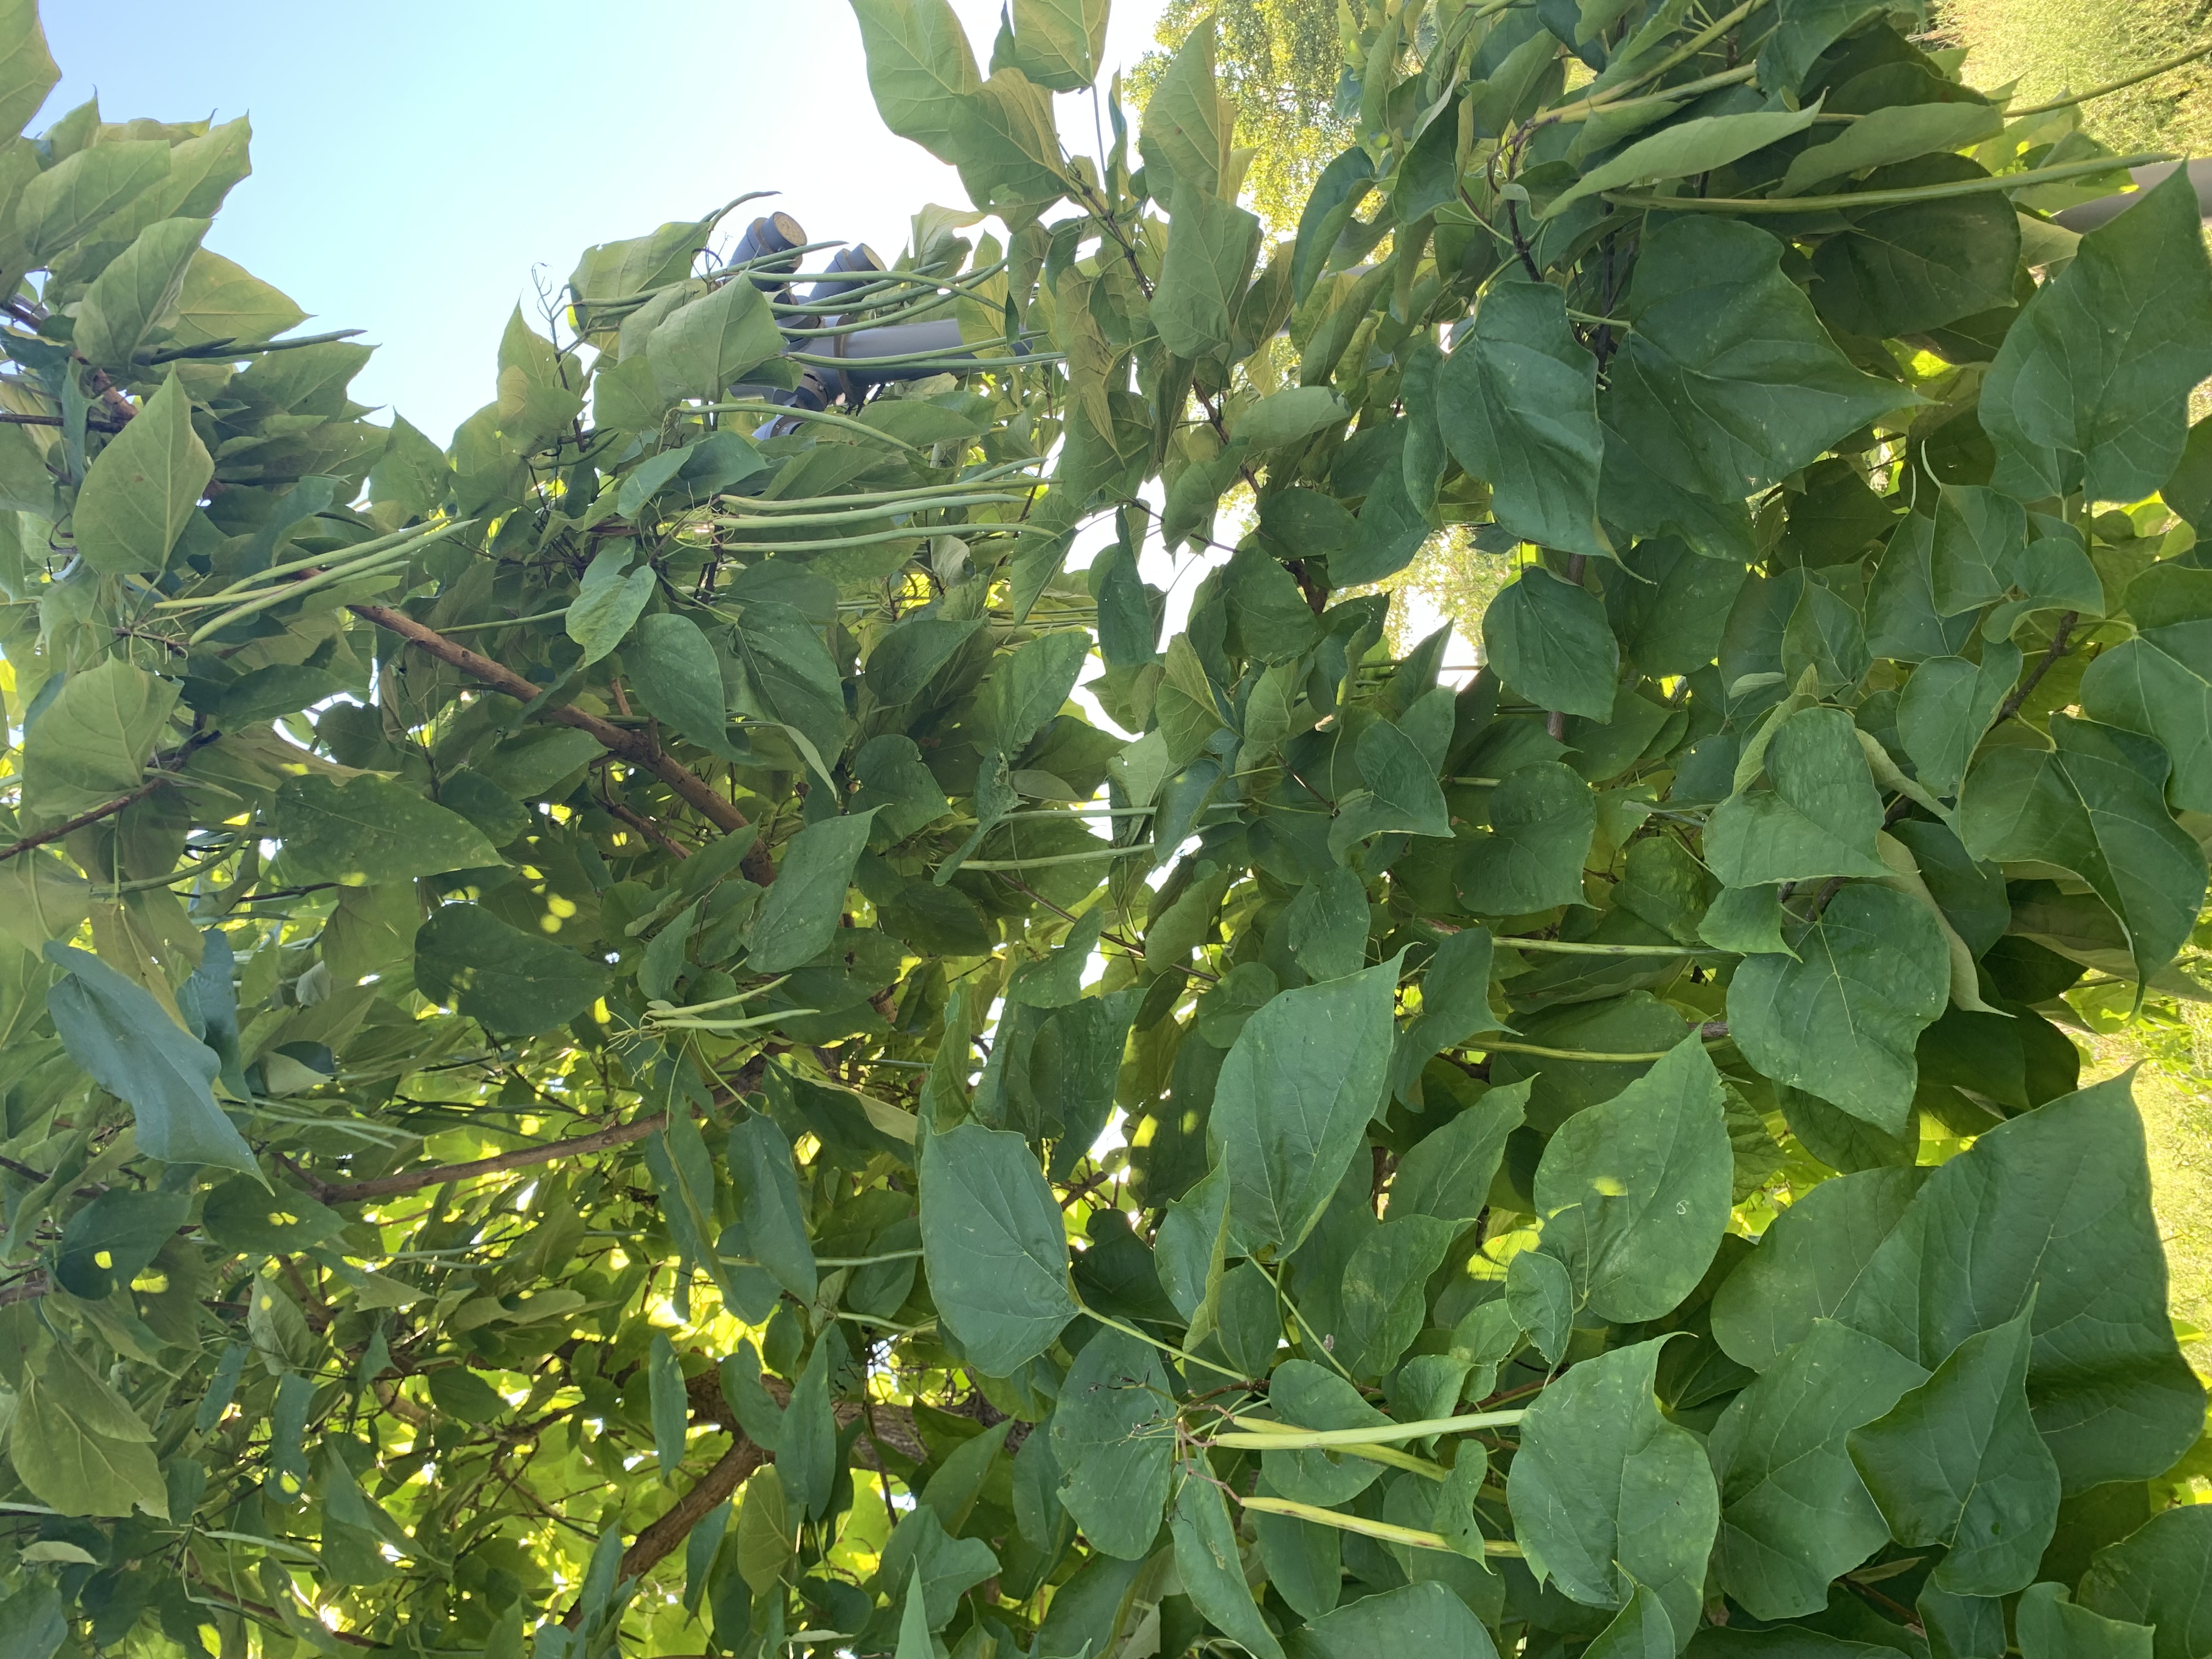 A tree with long, green objects hanging from it that look like green beans.